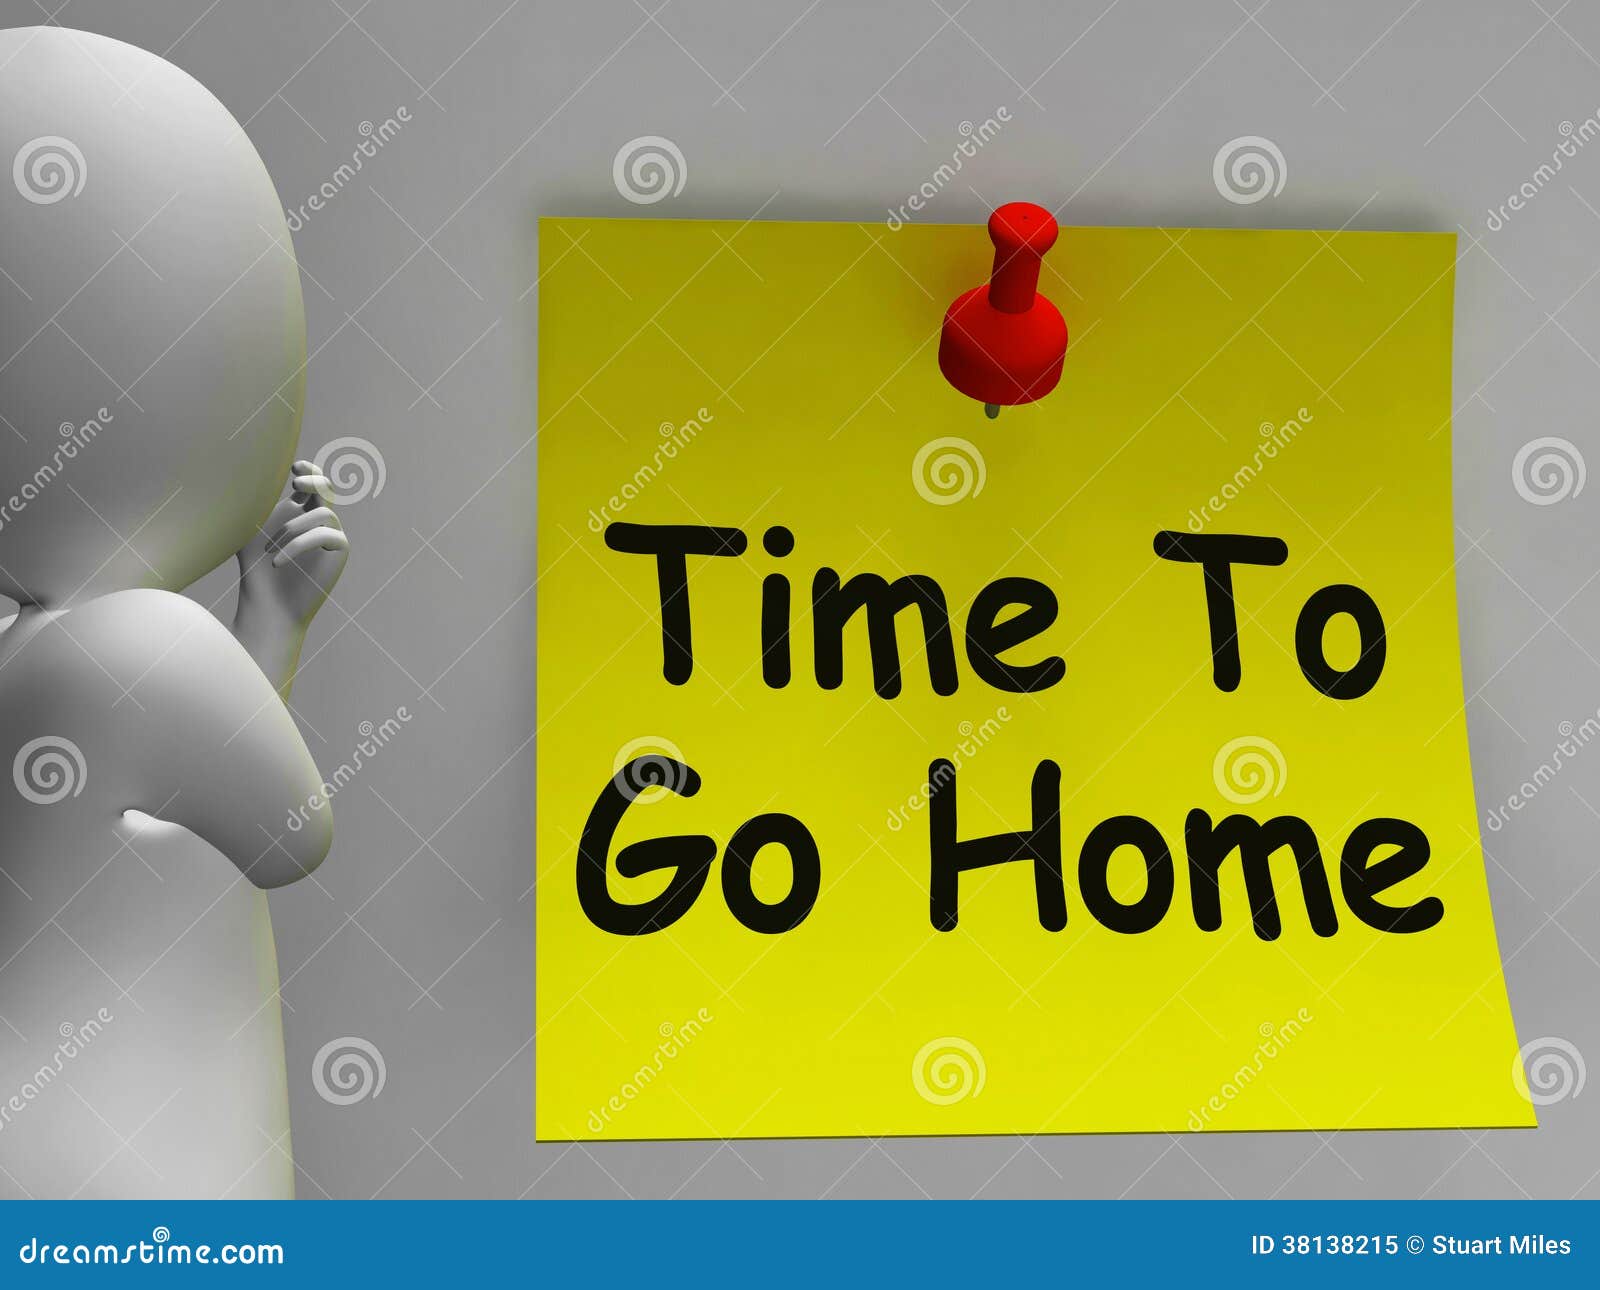 home time clipart - photo #27